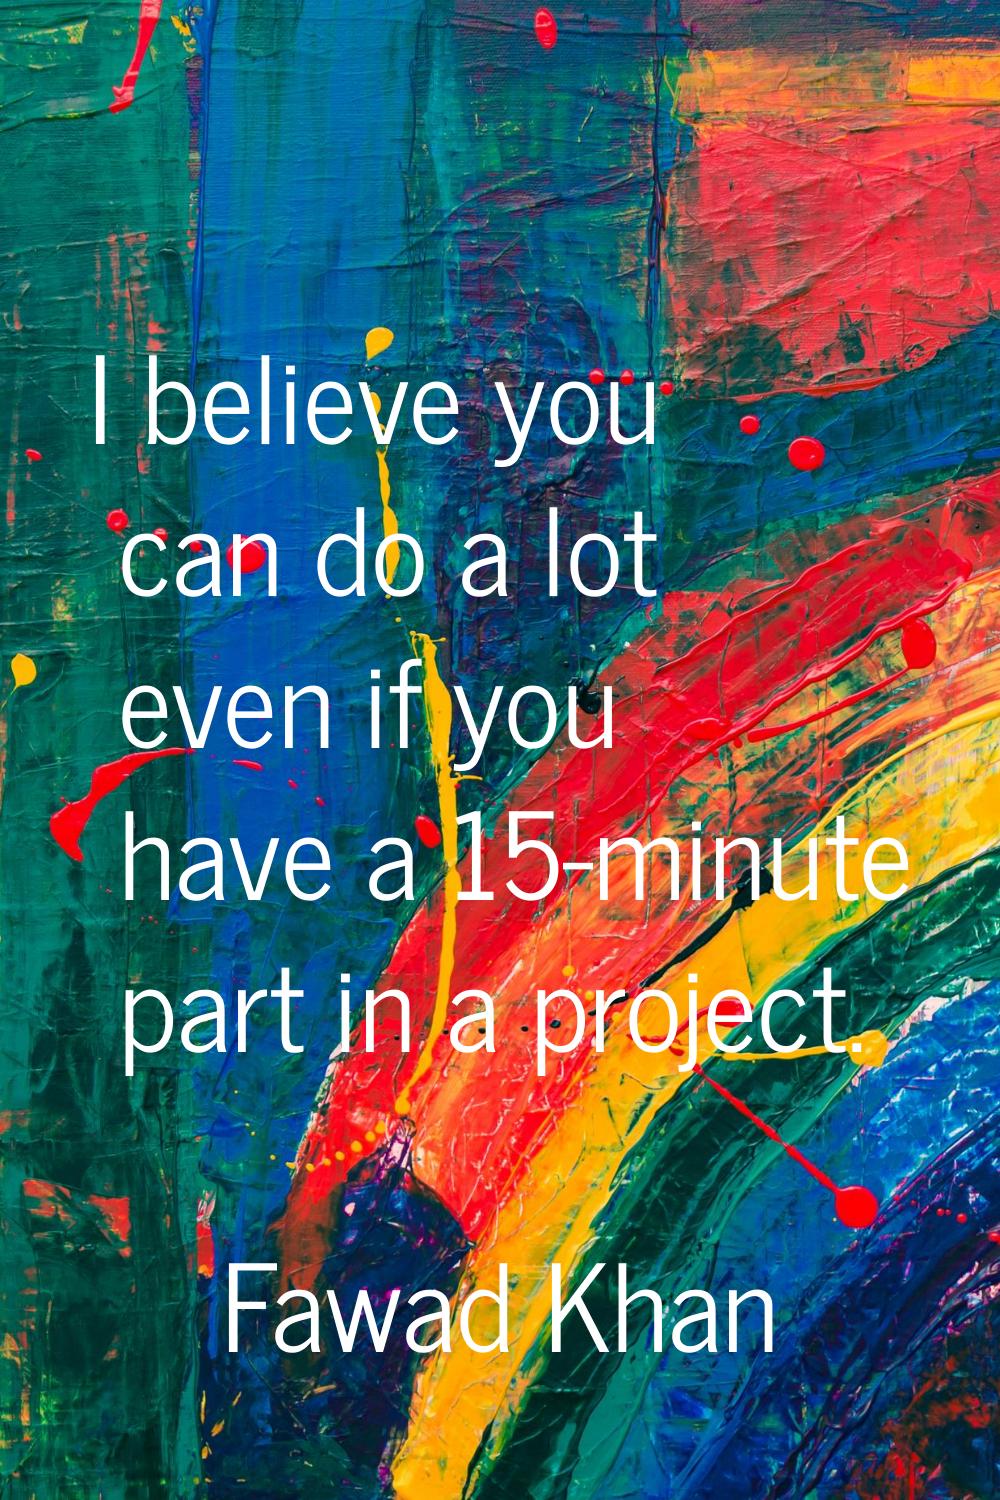 I believe you can do a lot even if you have a 15-minute part in a project.